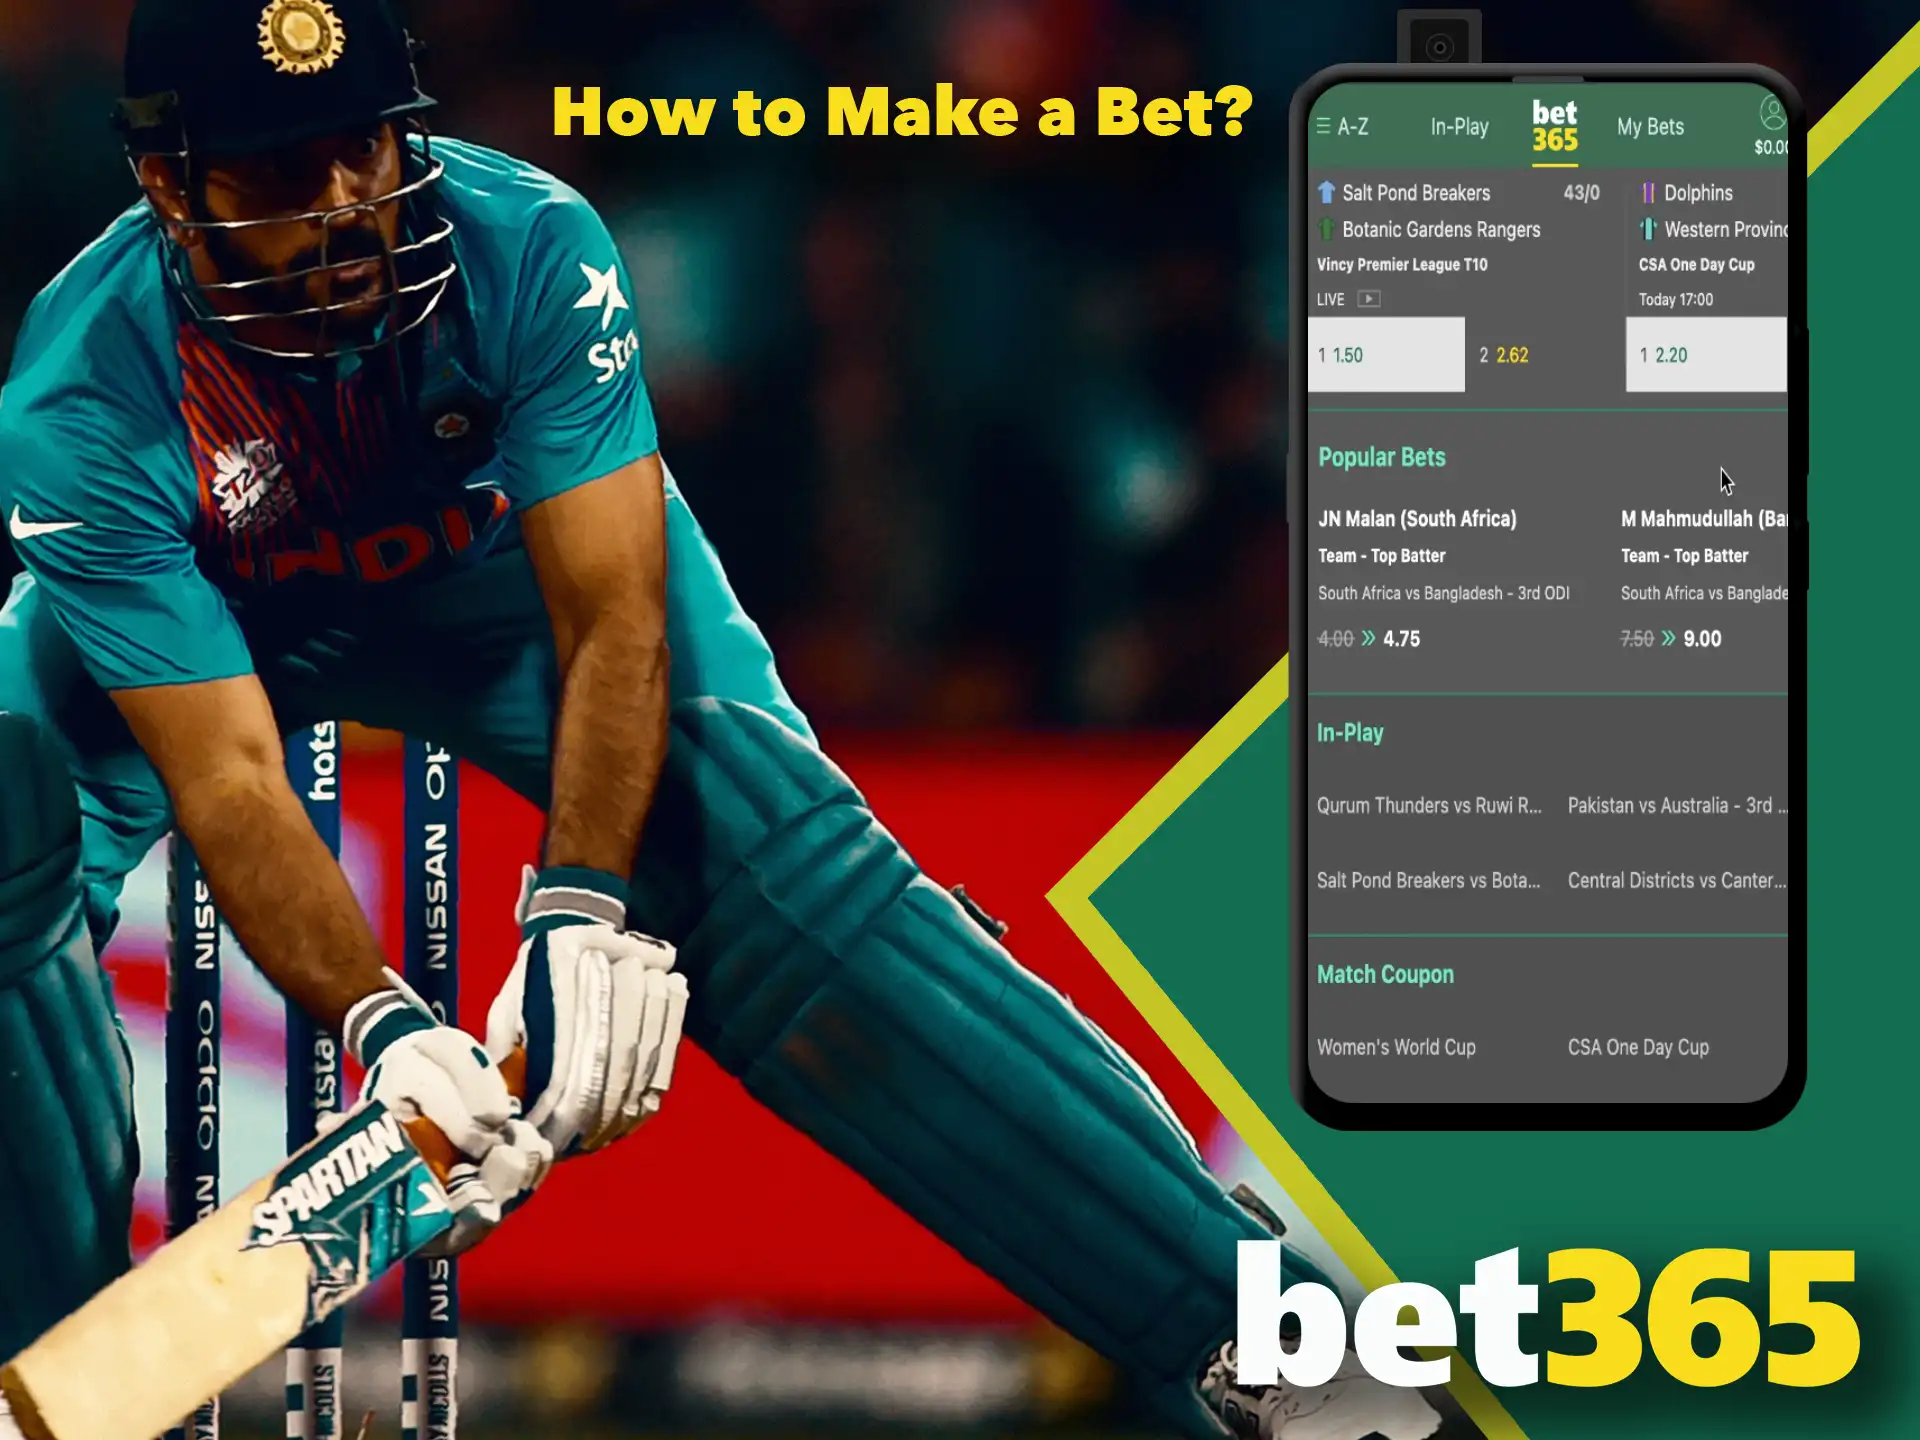 Our instruction will help you place a bet at Bet365 app.